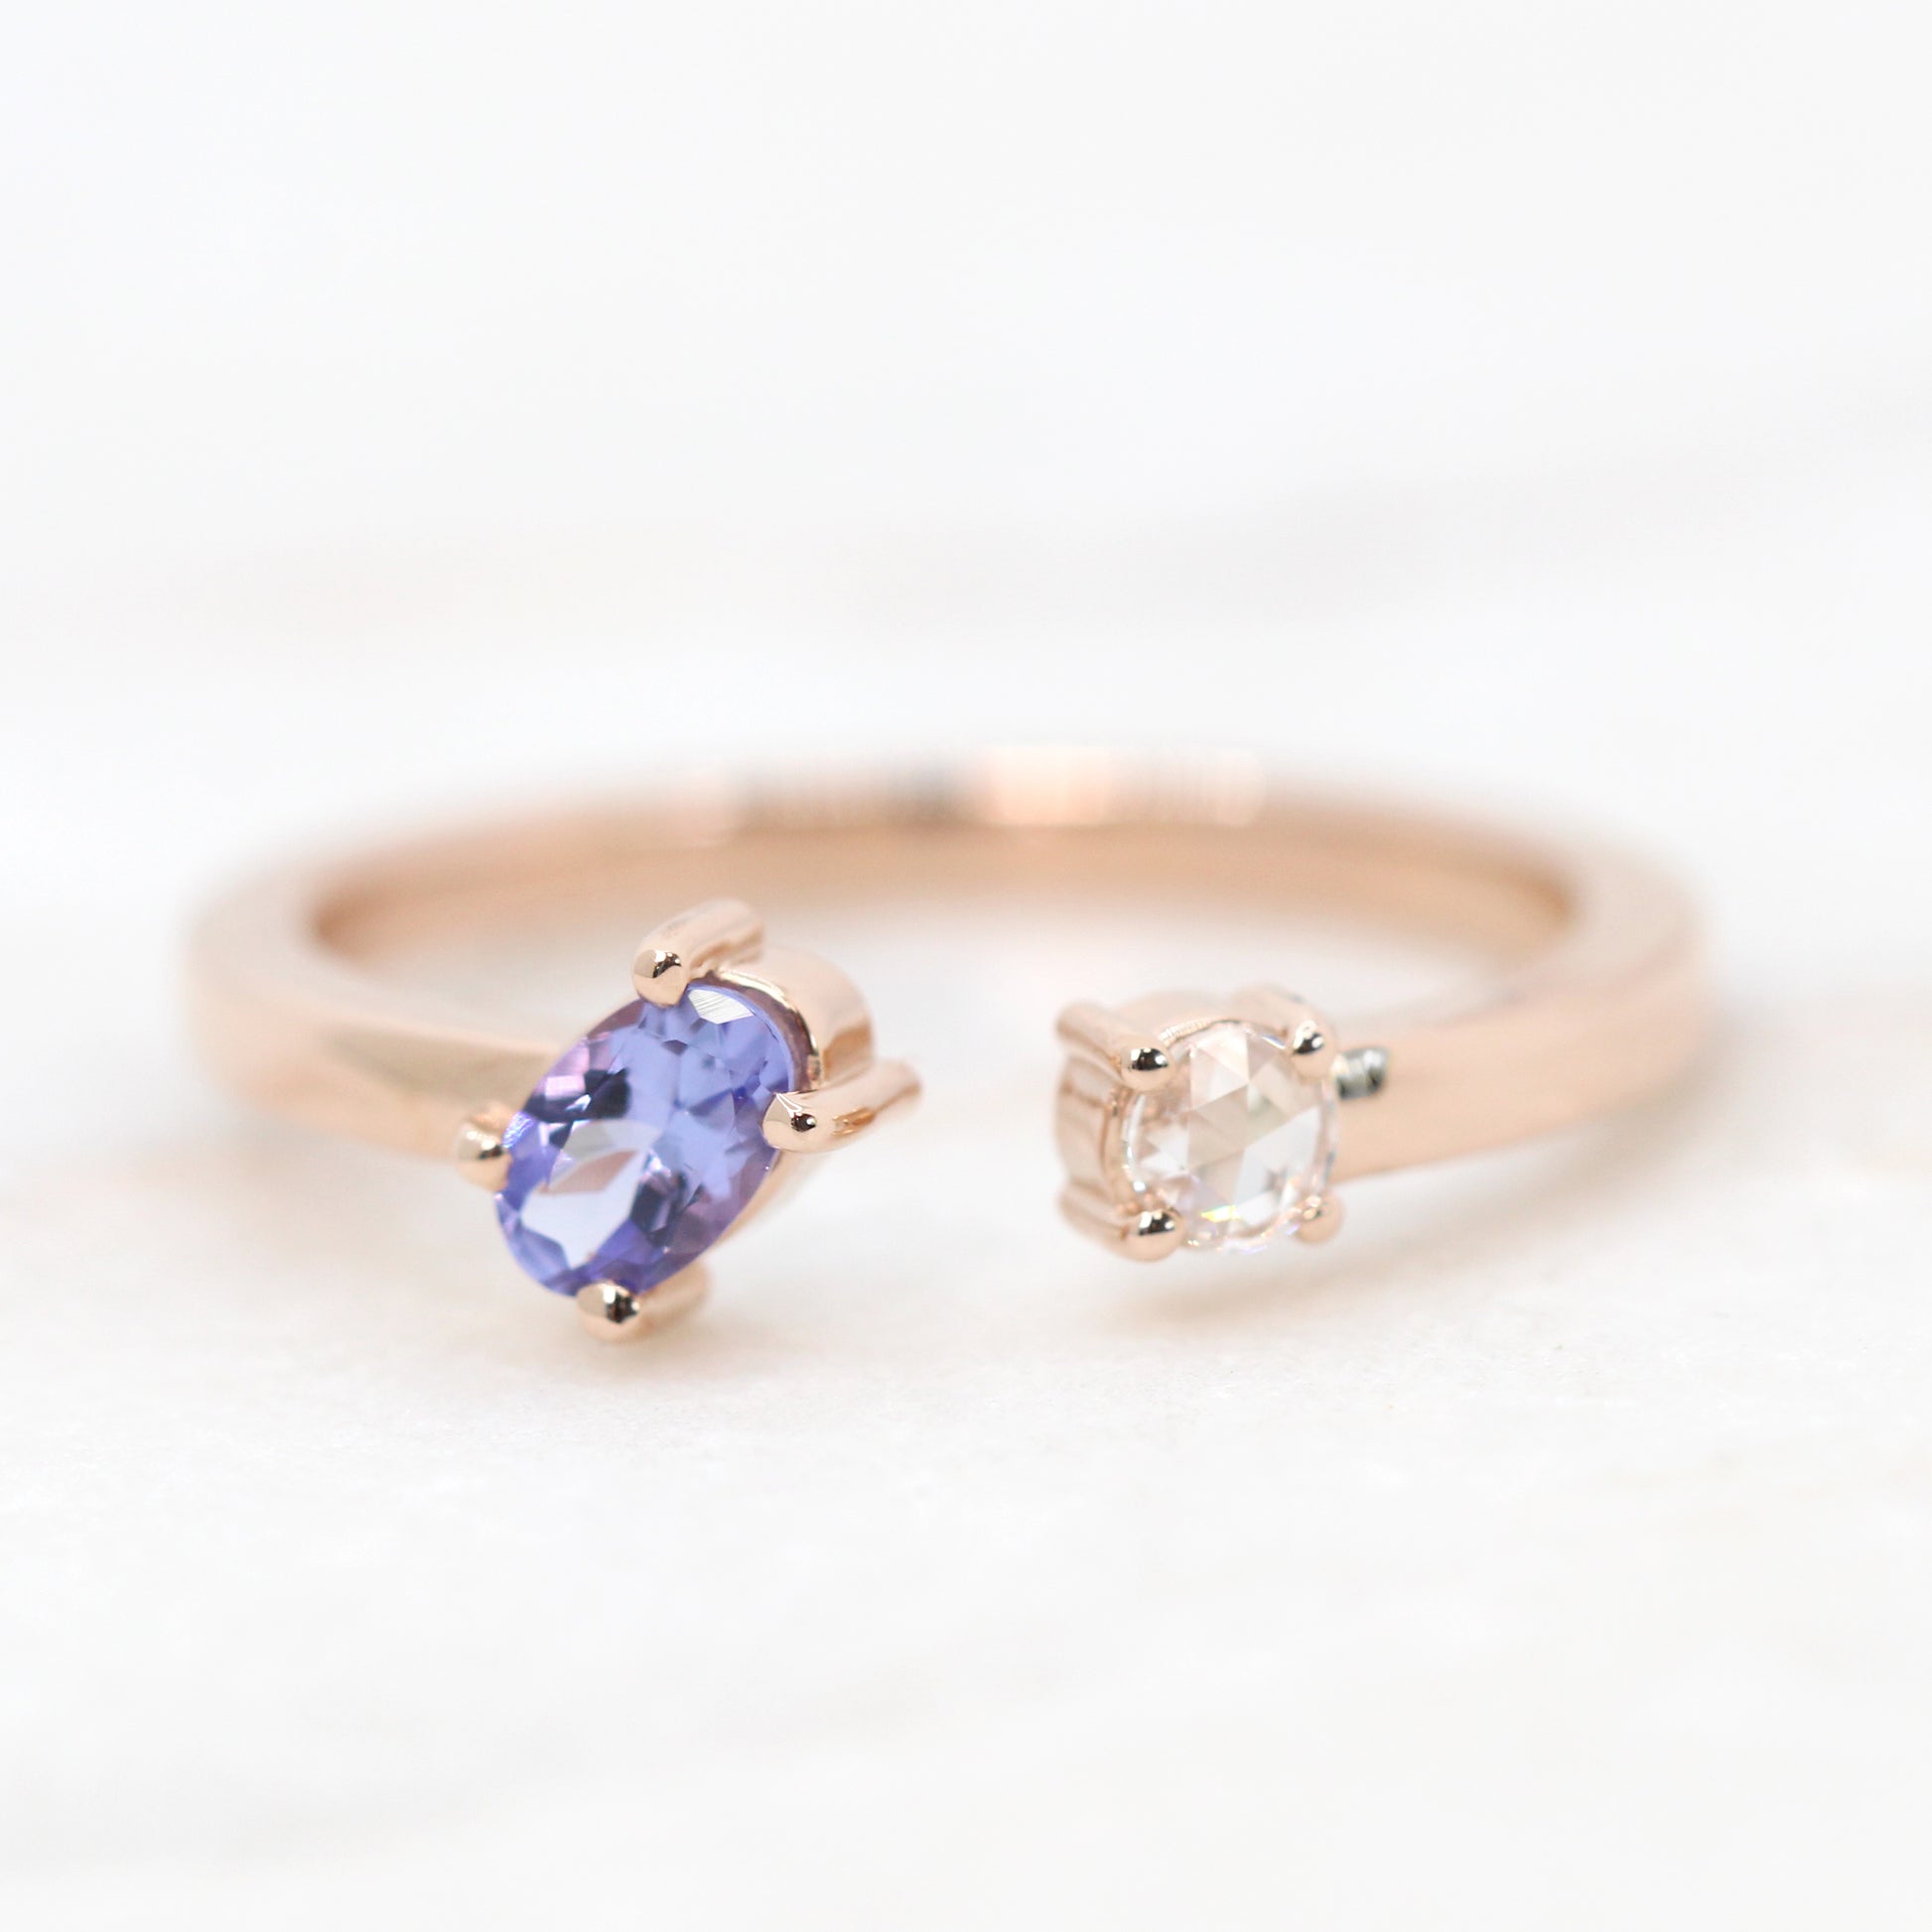 (SB) Jamie Ring with an Oval Tanzanite & Clear Round Diamond - Made to Order, Choose Your Gold Tone - Midwinter Co. Alternative Bridal Rings and Modern Fine Jewelry